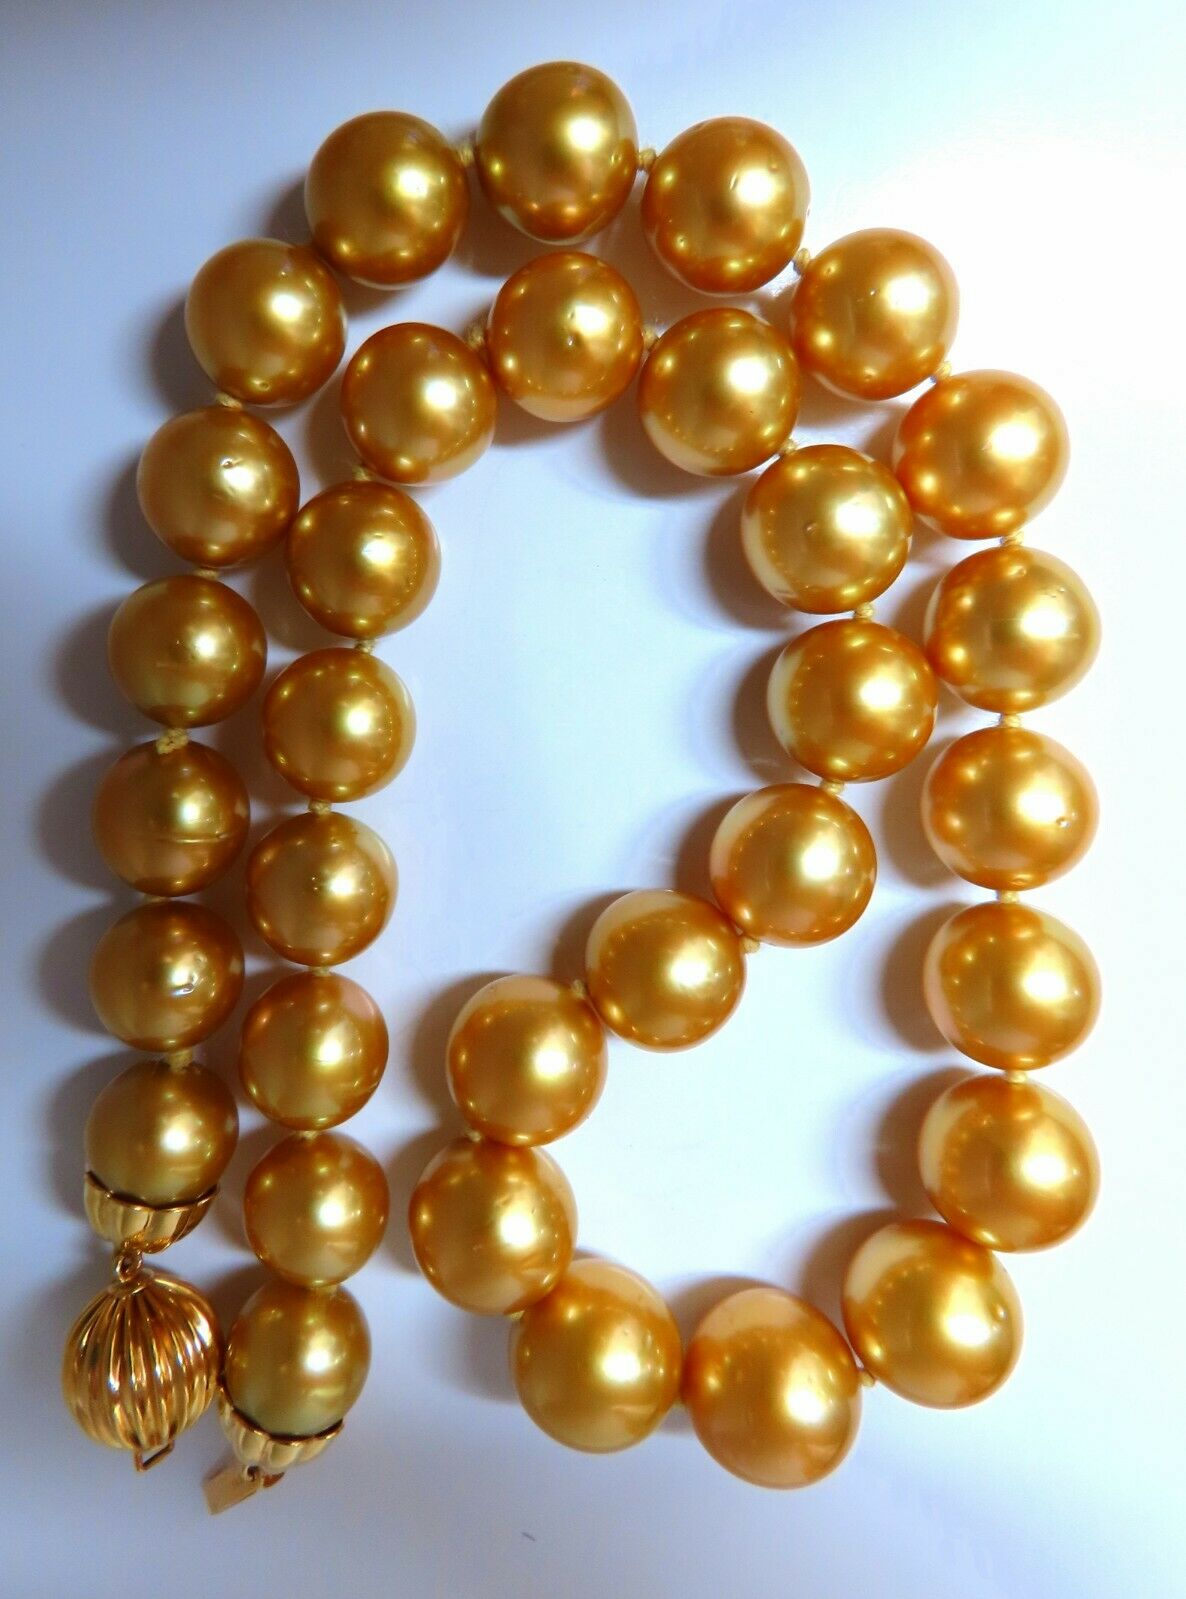 GIA certified Natural South Sea Golden Pearls Necklace 14mm